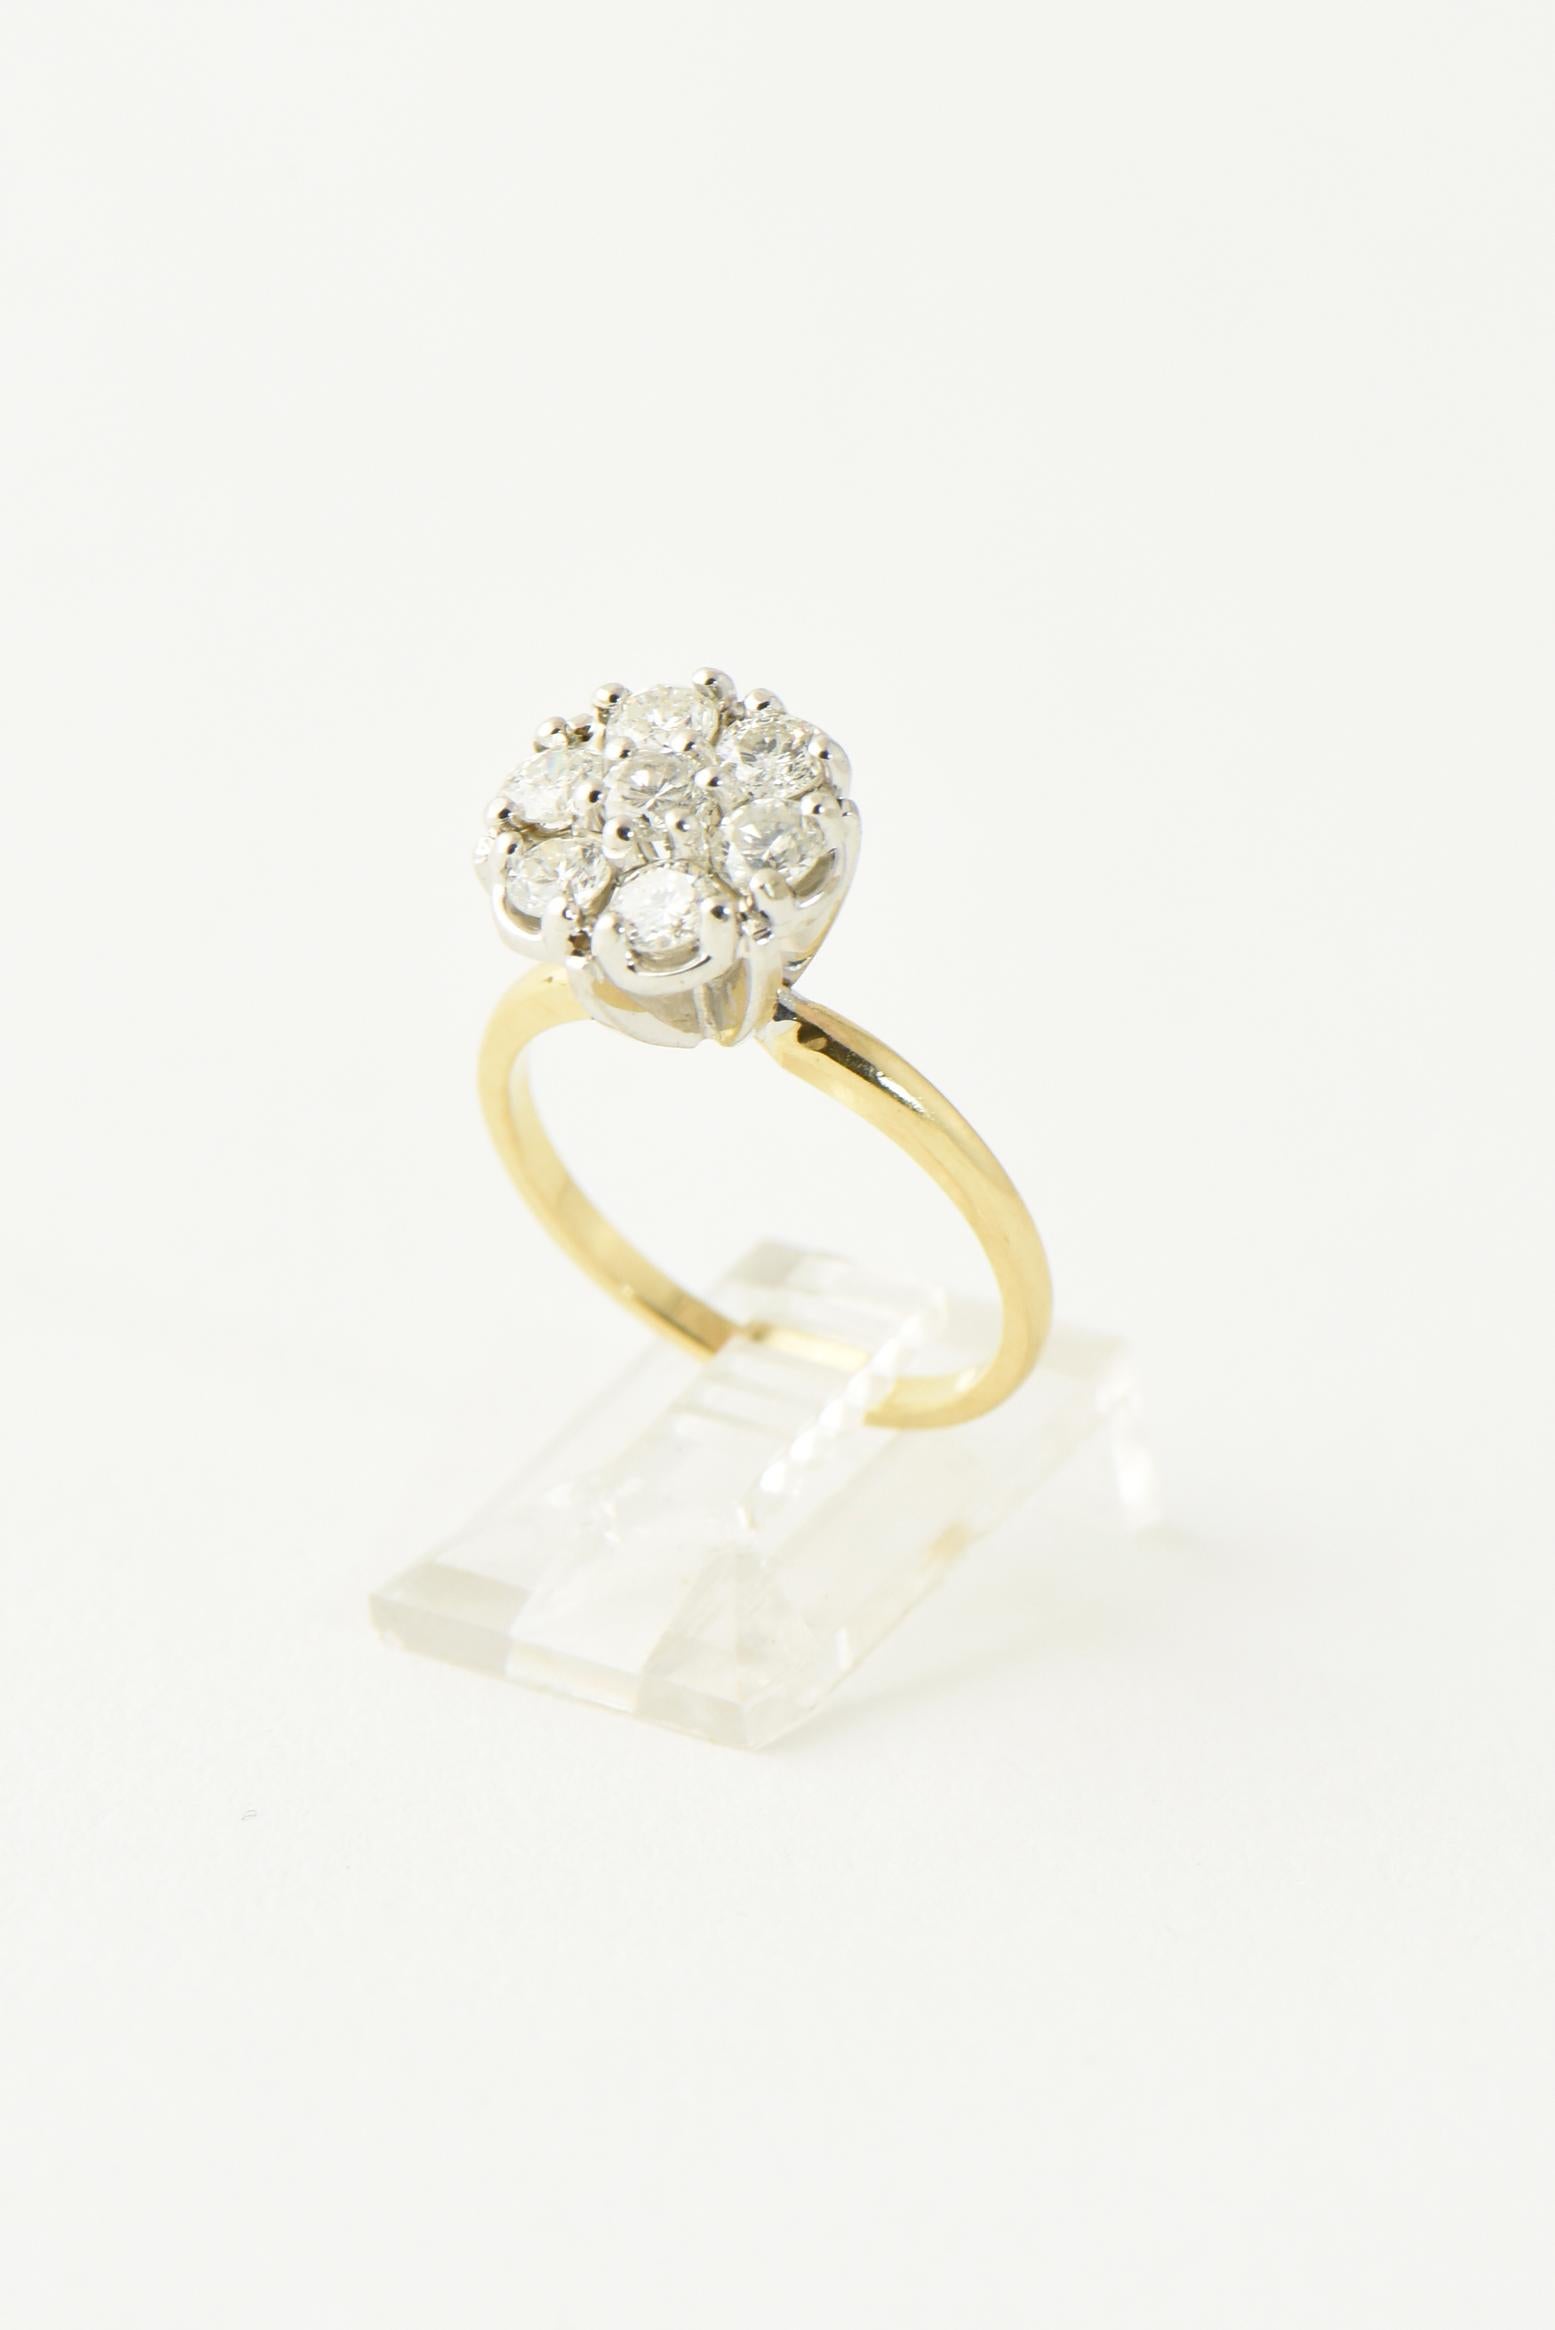 Mid 20th century 10K yellow gold and white gold diamond cluster ring. featuring a floral design.  Approximately 1 carat of SI2 - HI diamonds. Marked: 10K. US size 6.5; can be sized.